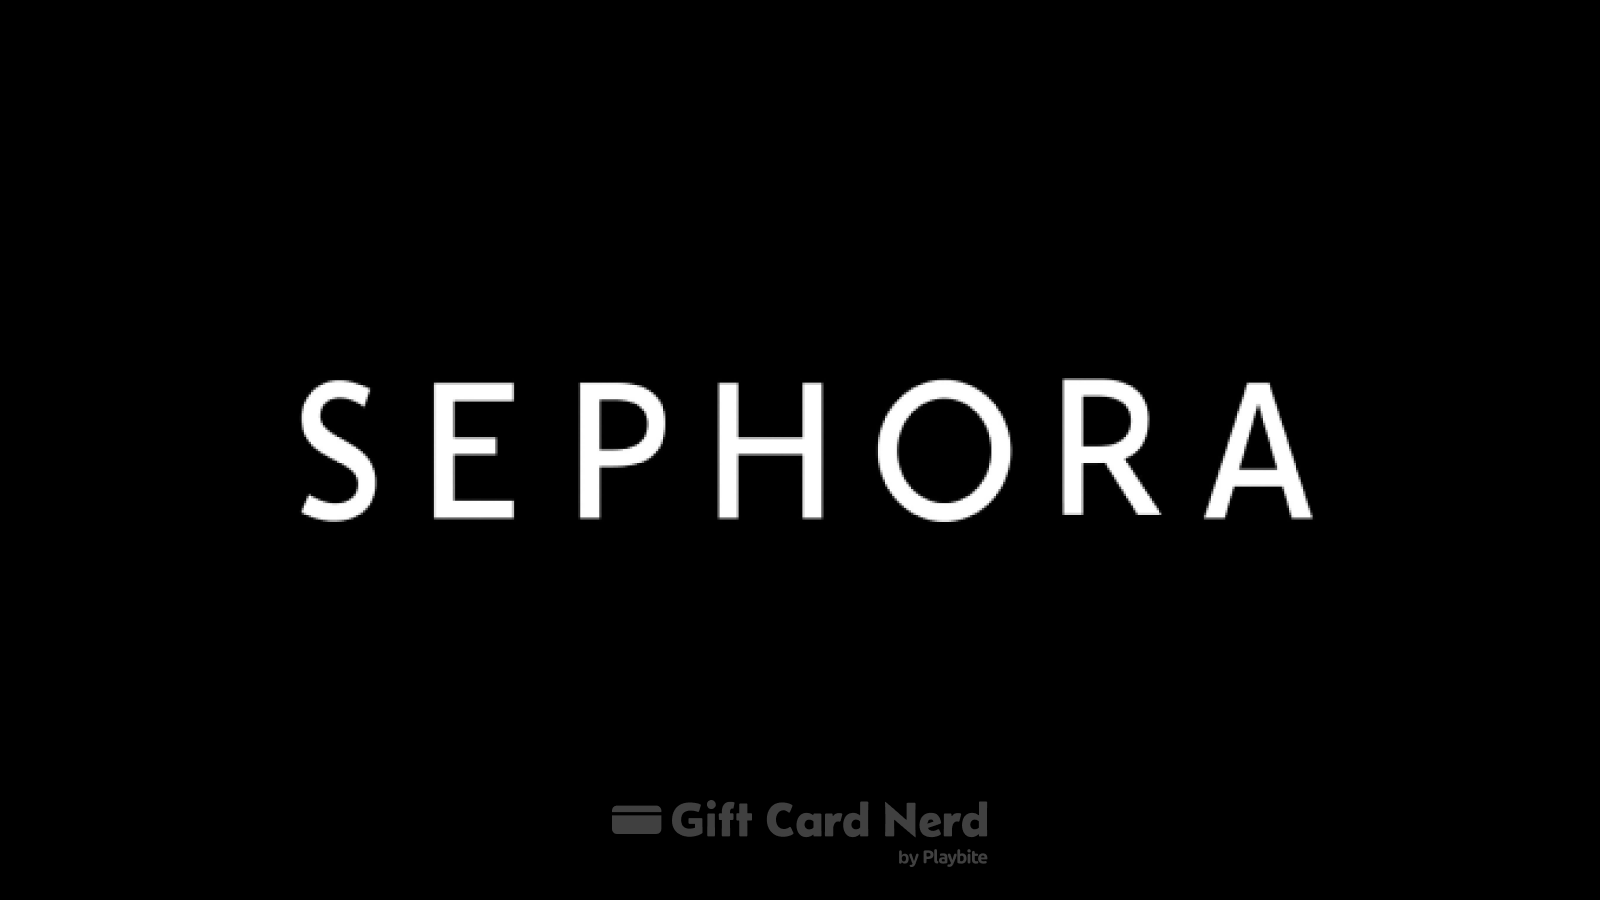 Can I use a Sephora gift card on DoorDash?